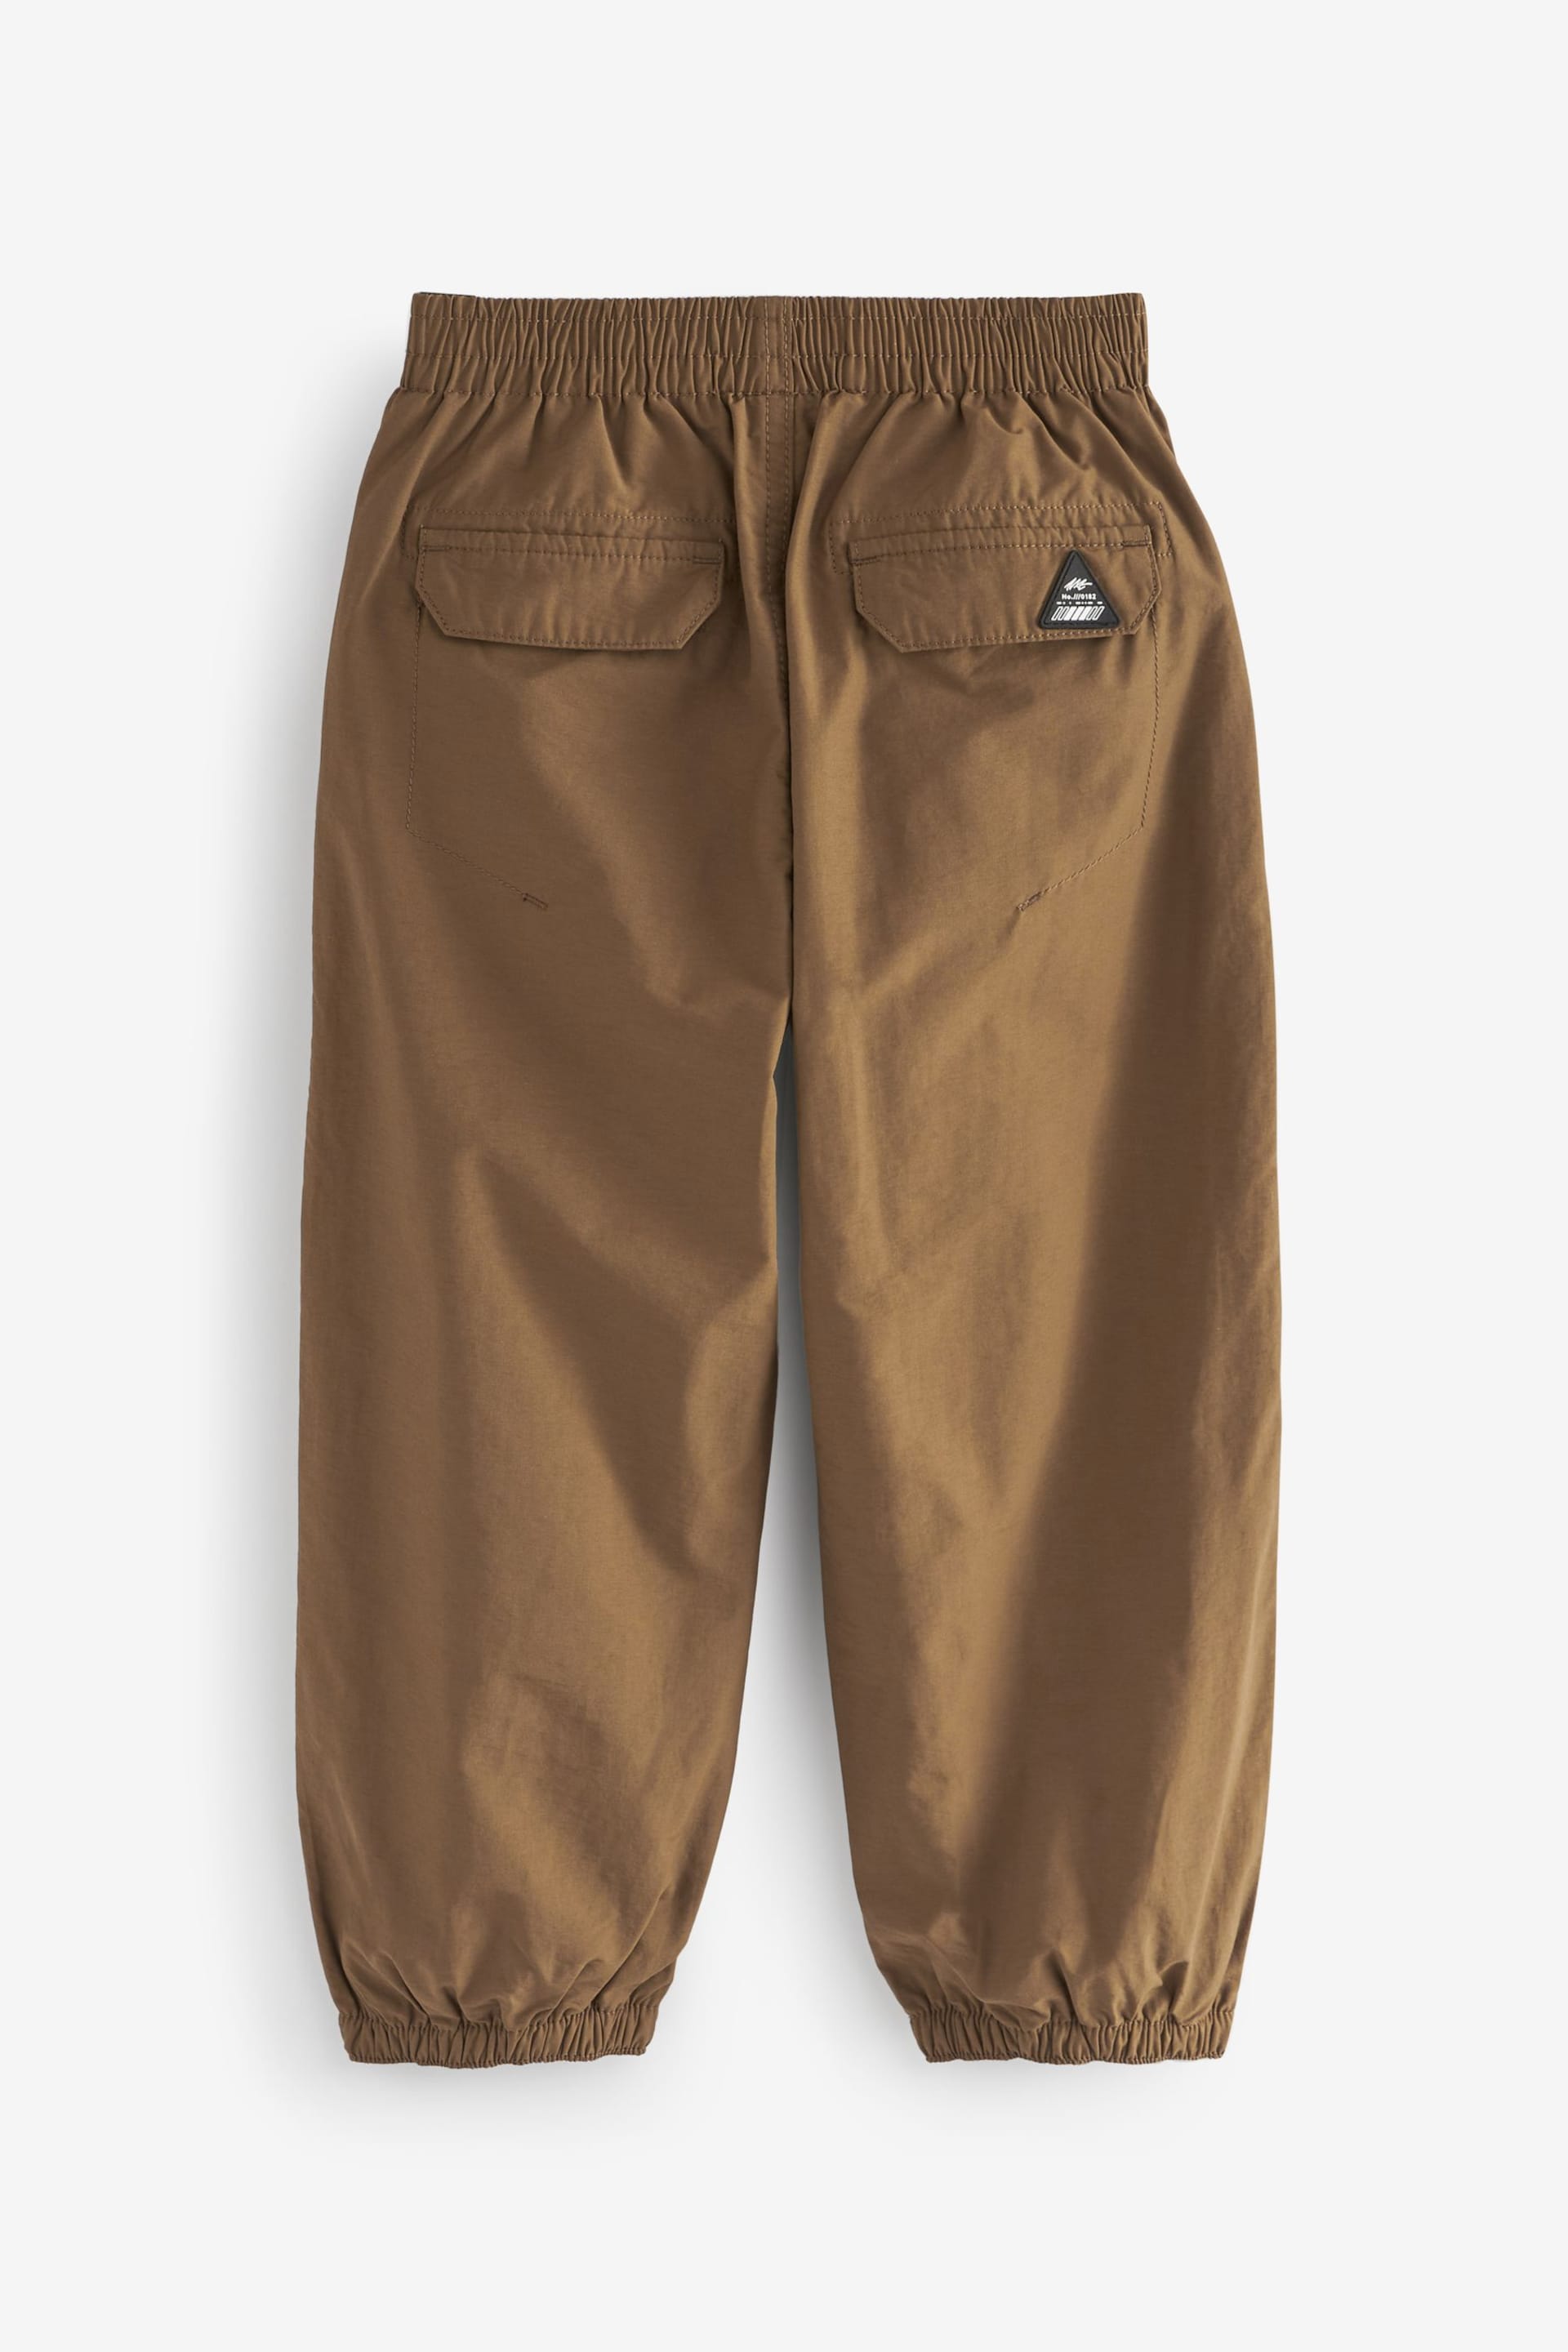 Tan Brown Parachute Trousers (3-16yrs) - Image 8 of 9